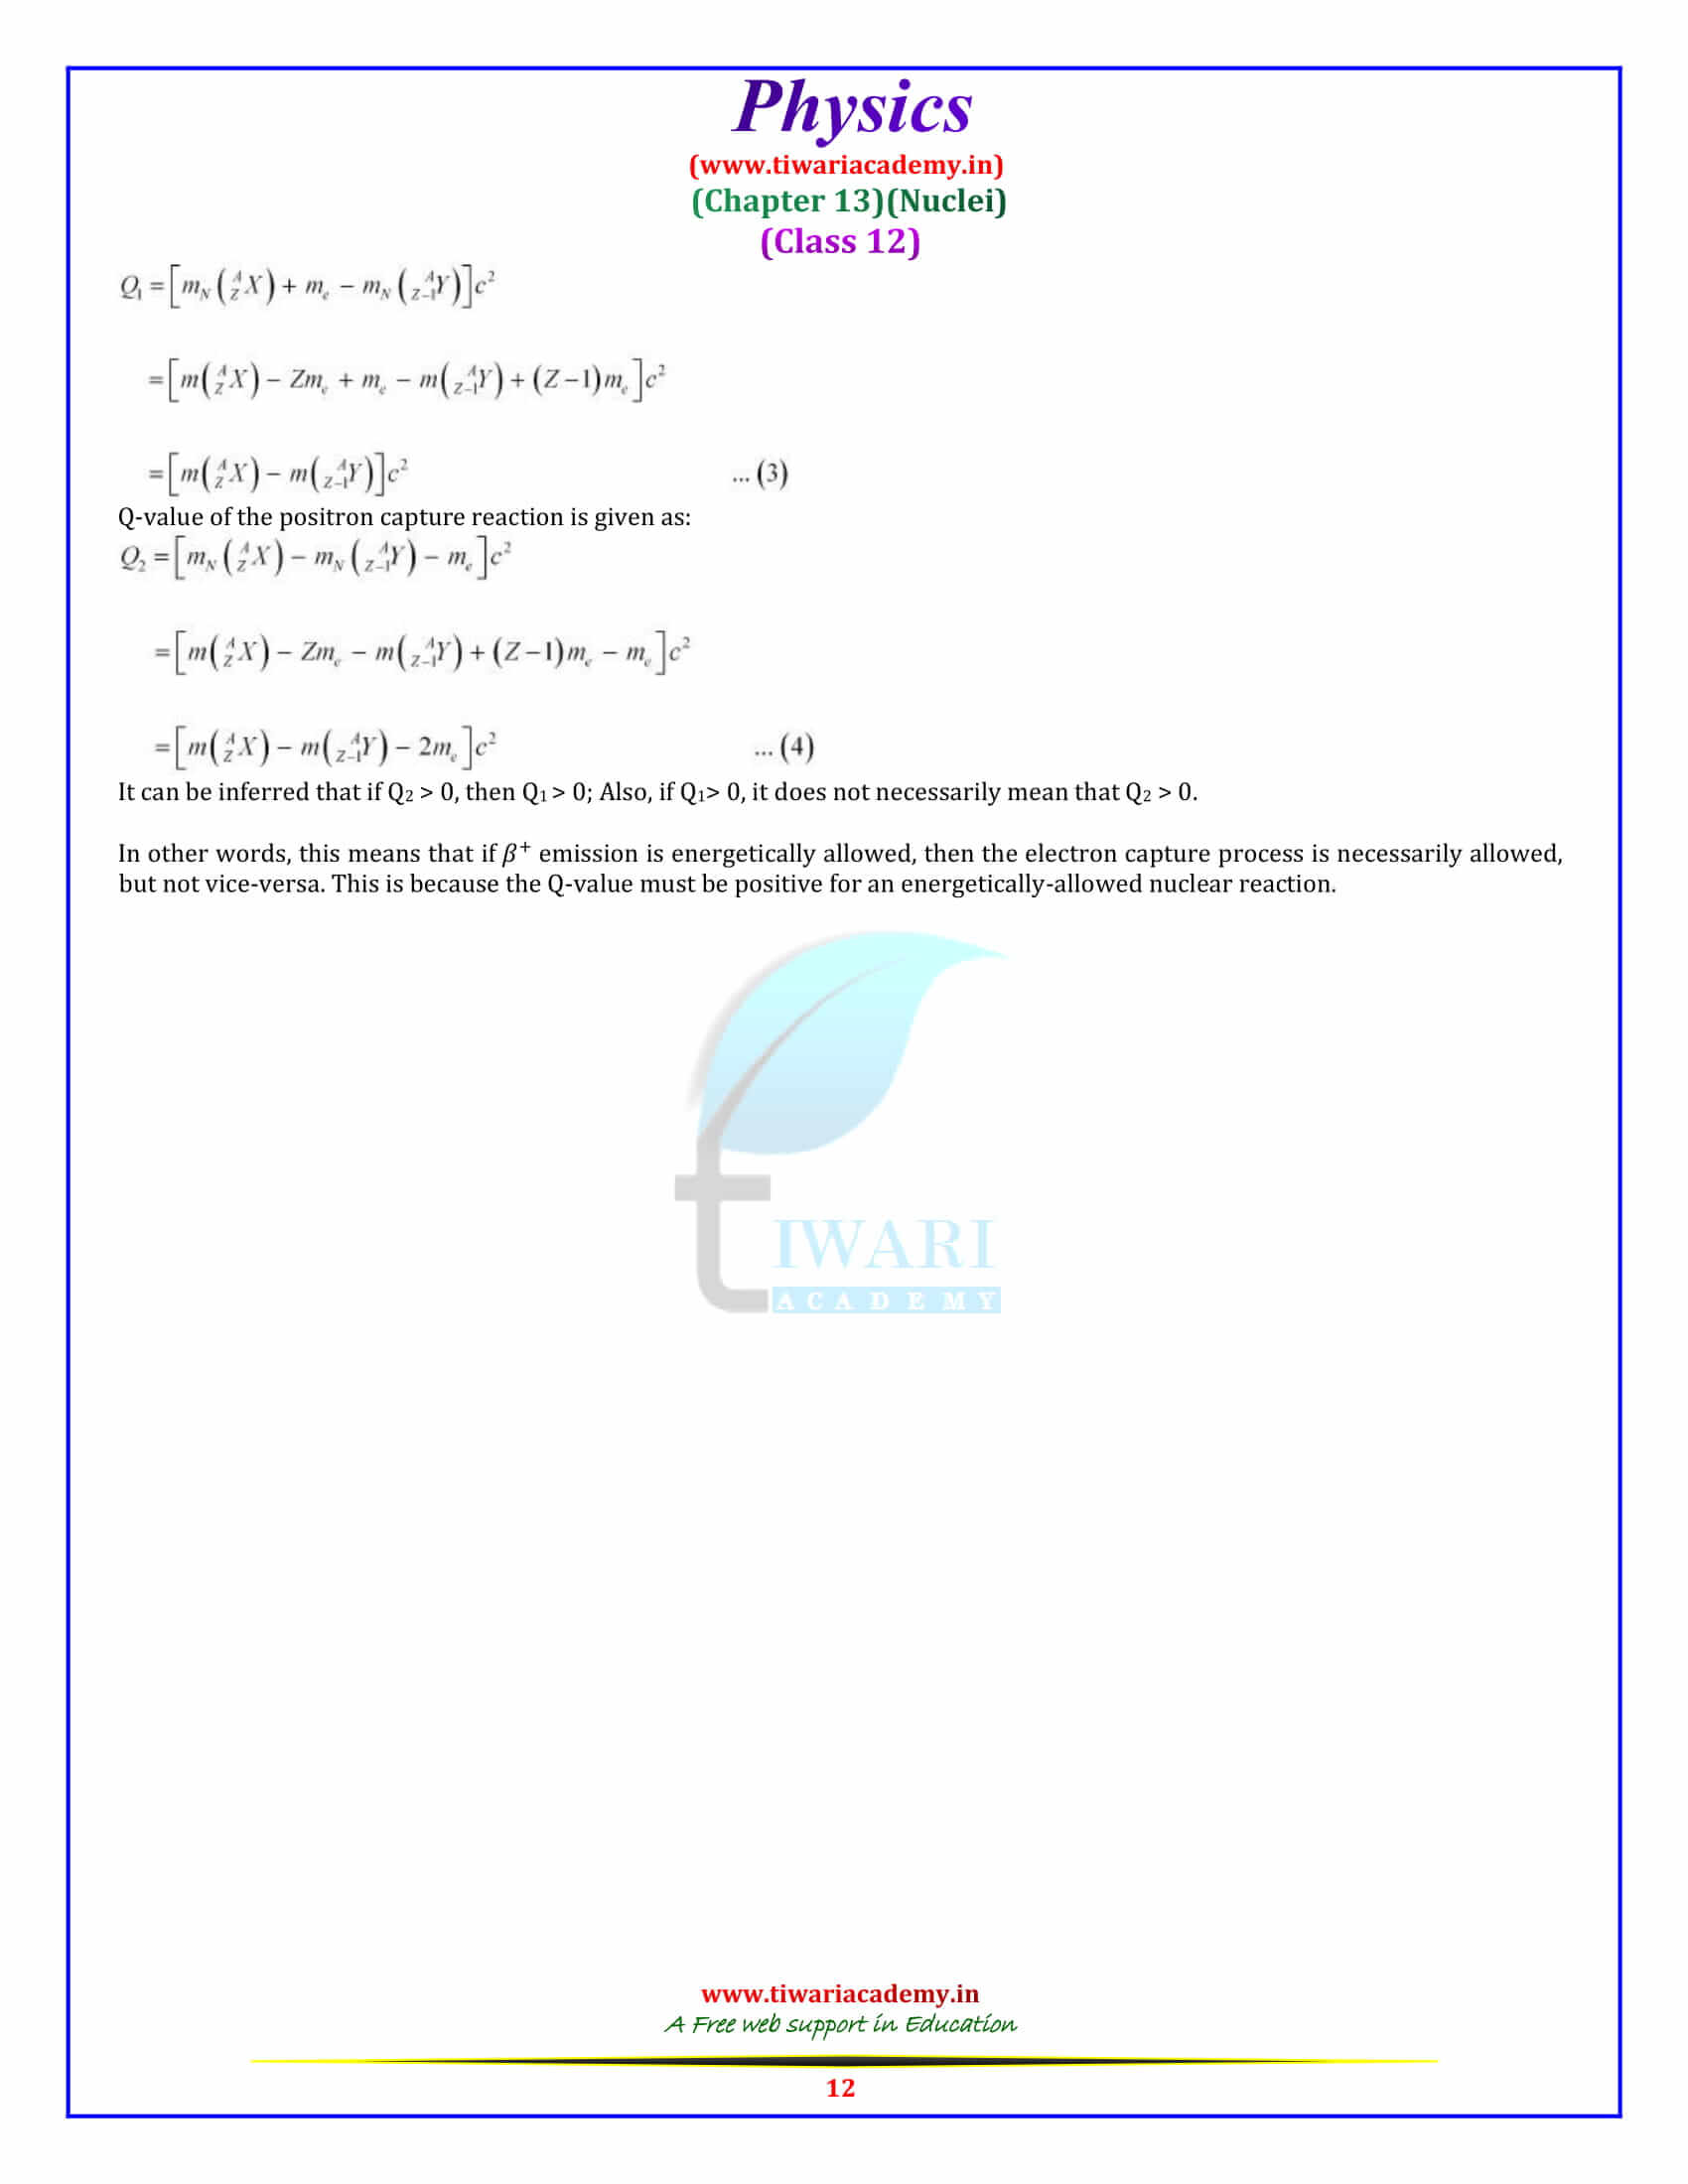 NCERT Solutions for Class 12 Physics Chapter 13 exercises solutions